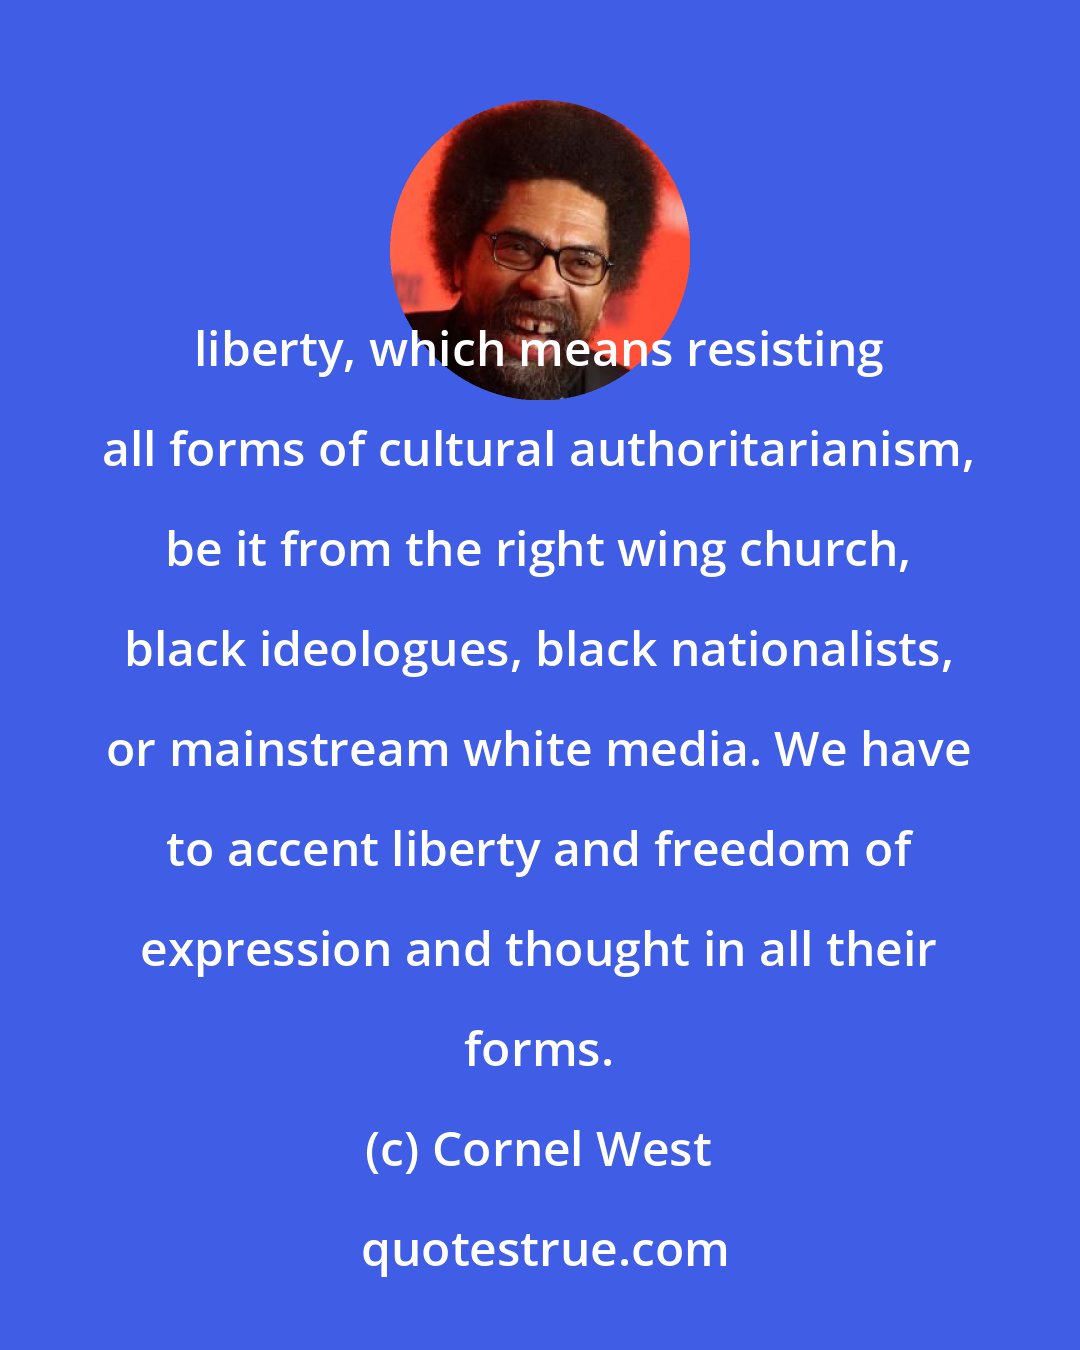 Cornel West: liberty, which means resisting all forms of cultural authoritarianism, be it from the right wing church, black ideologues, black nationalists, or mainstream white media. We have to accent liberty and freedom of expression and thought in all their forms.